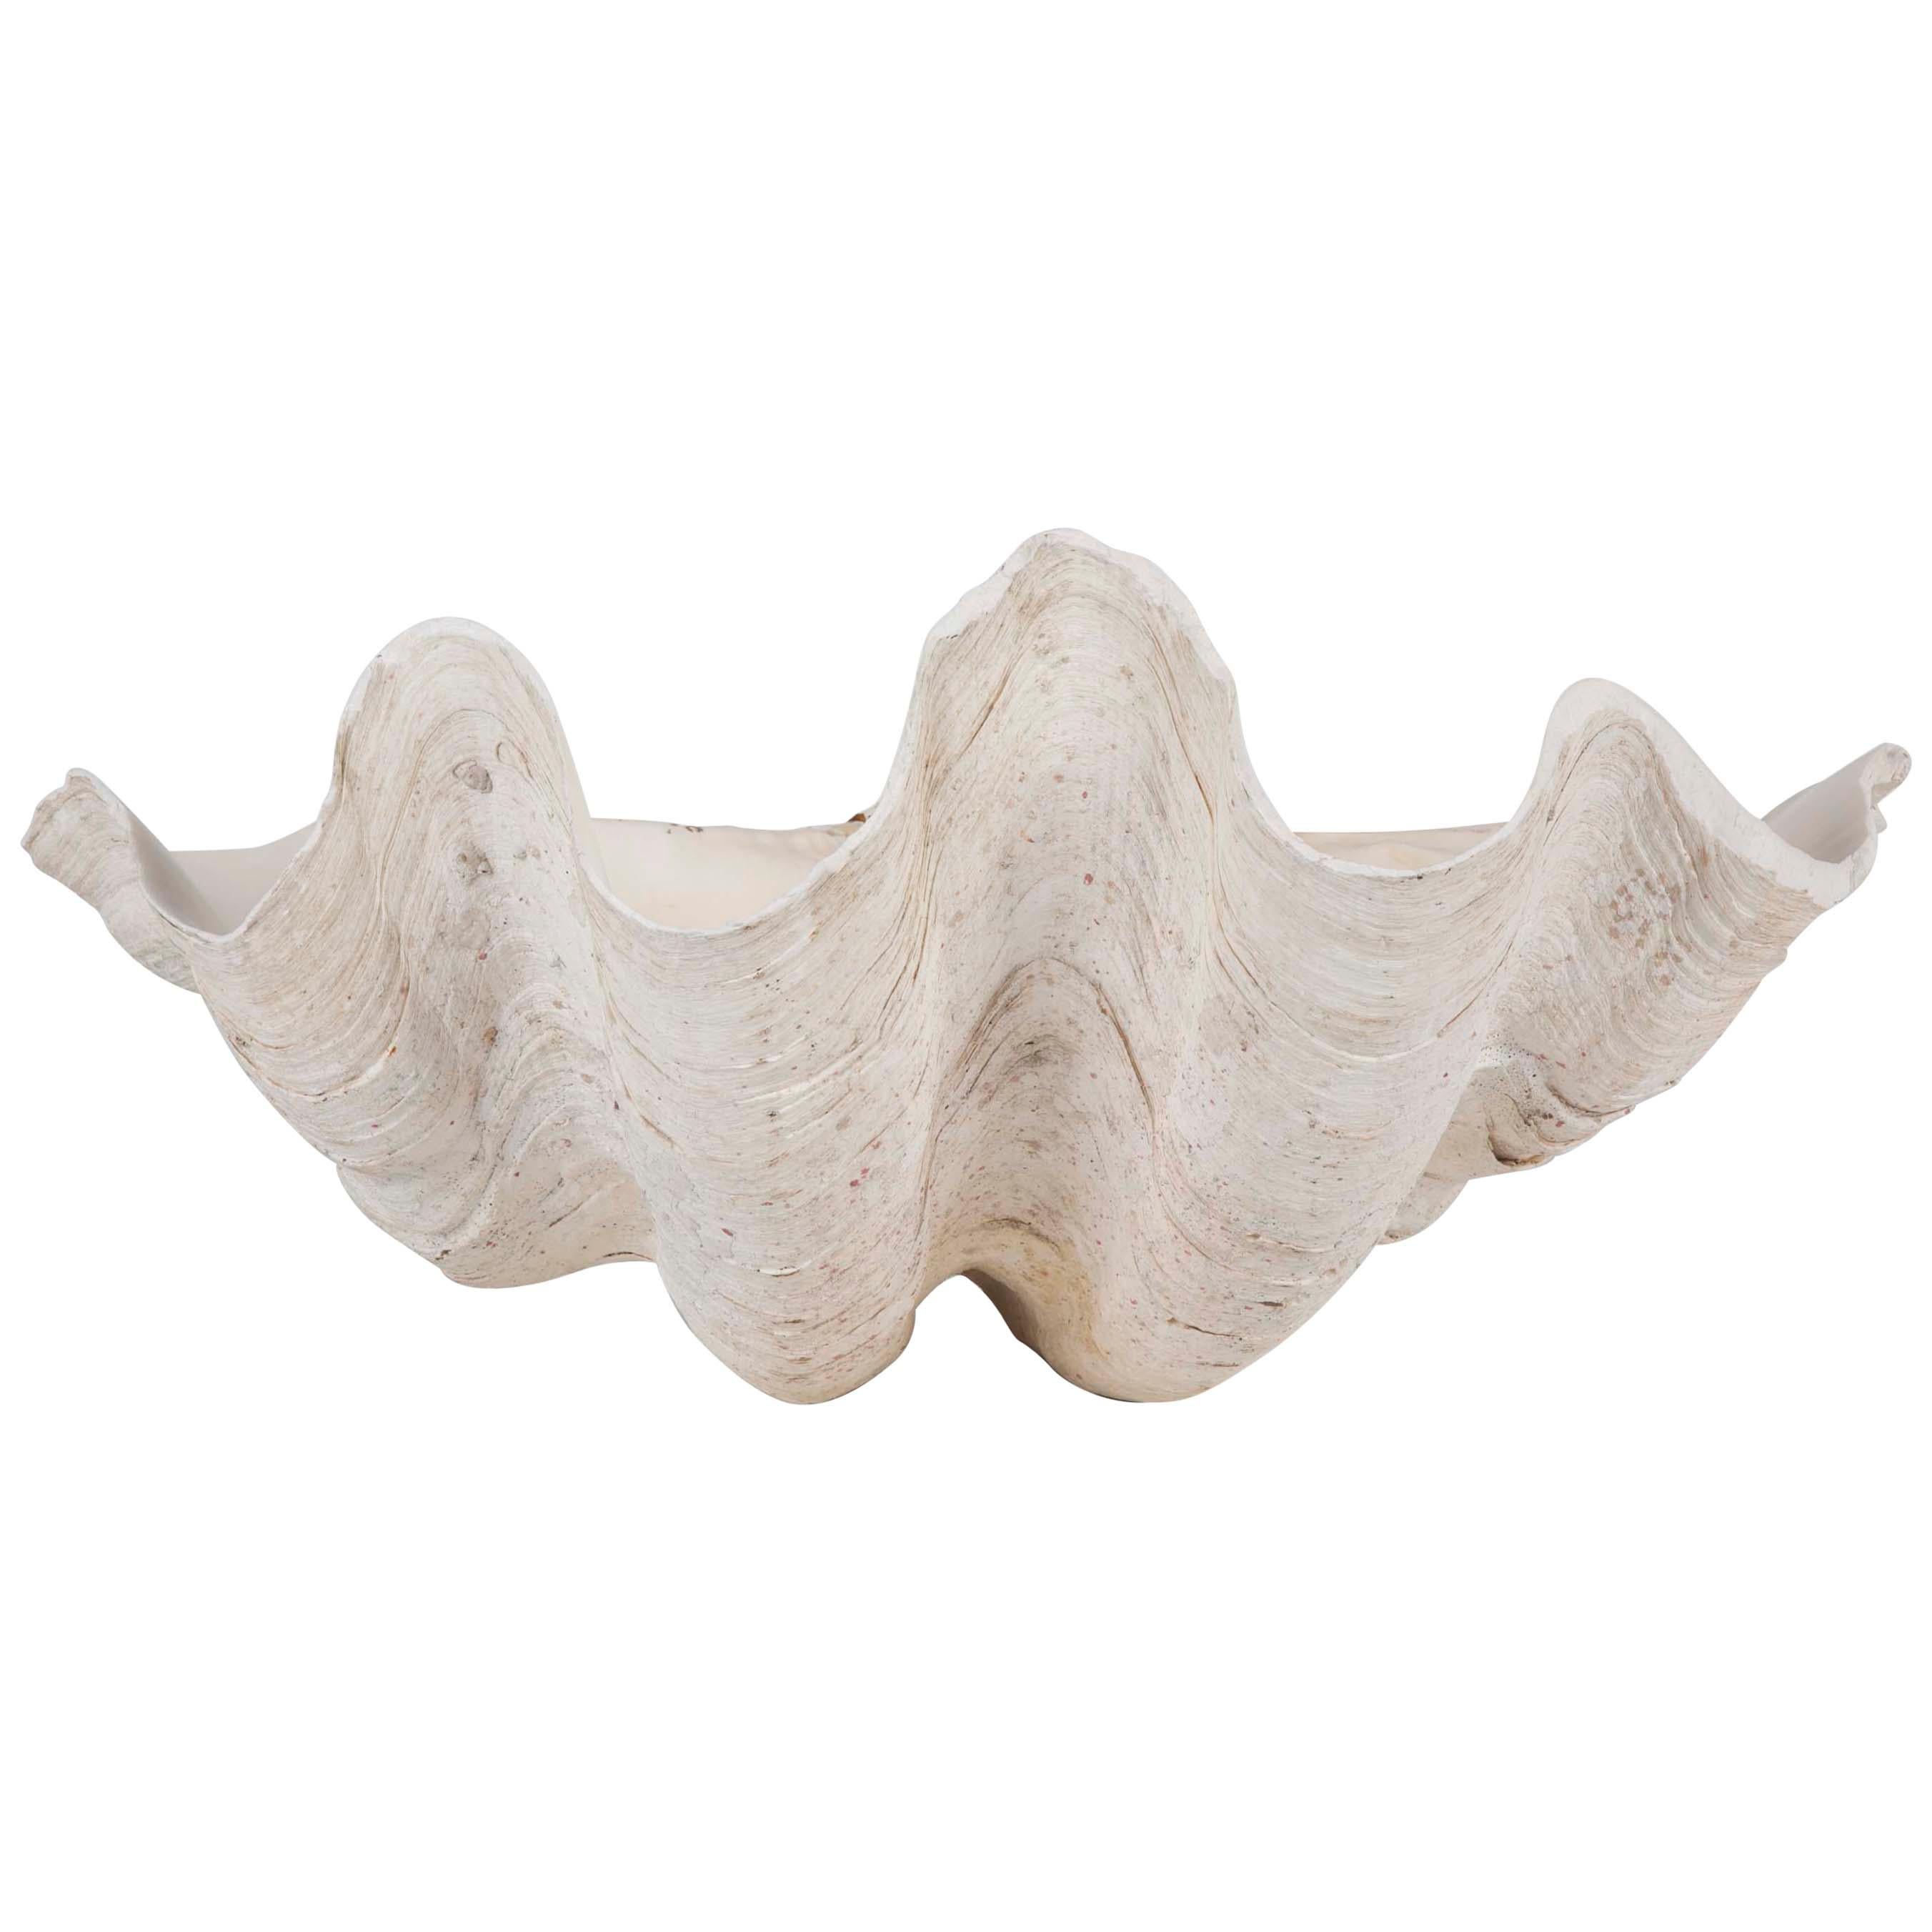 Giant Scalloped Clam Shell Centrepiece